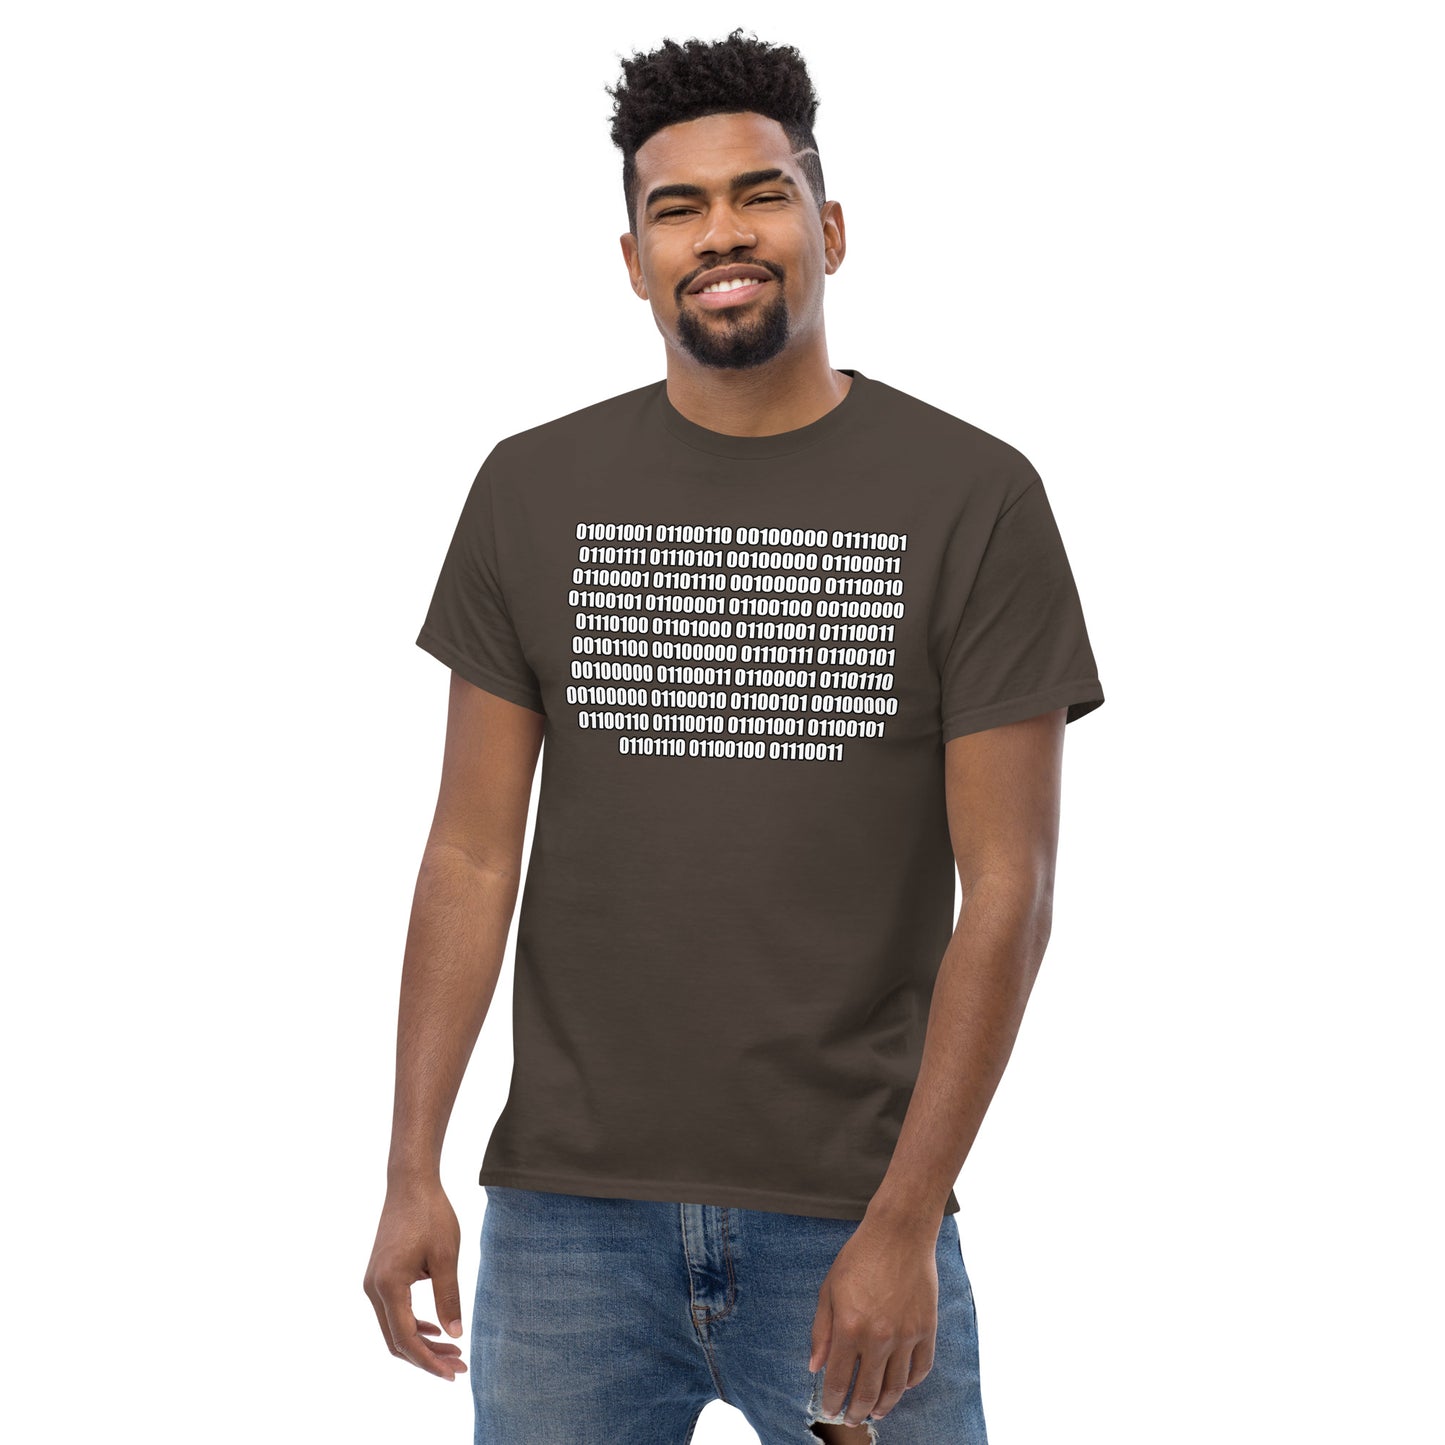 Men with dark chocolate t-shirt with binaire text "If you can read this"